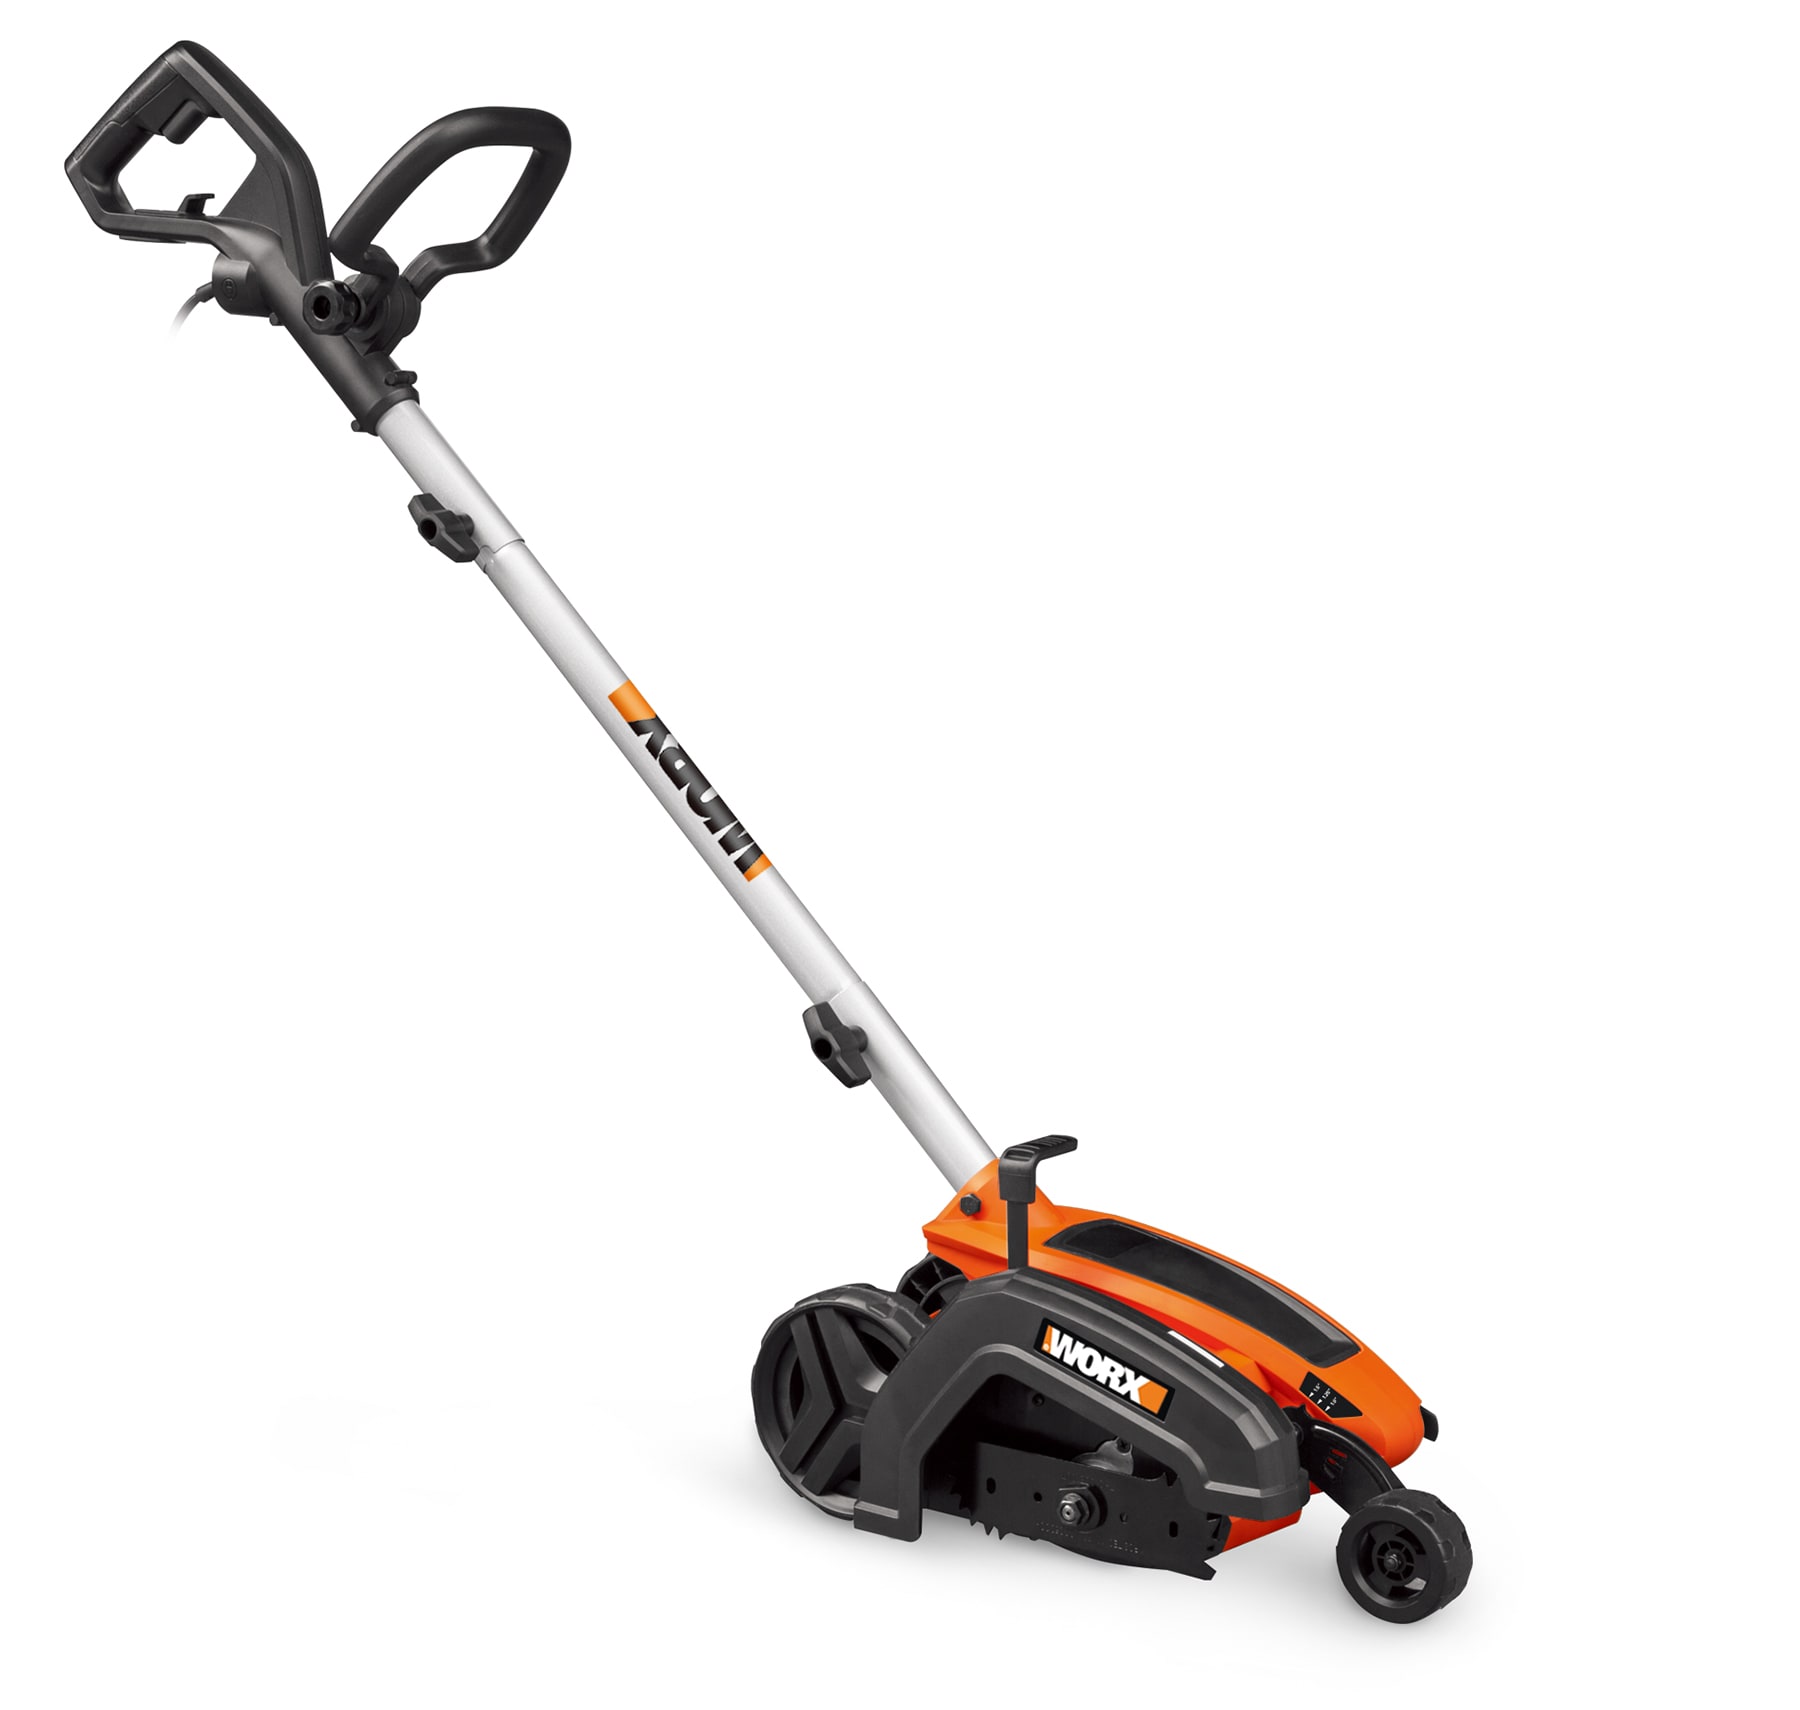 Black and Decker Edger and Trencher, 2-In-1, 12-Amp - tools - by